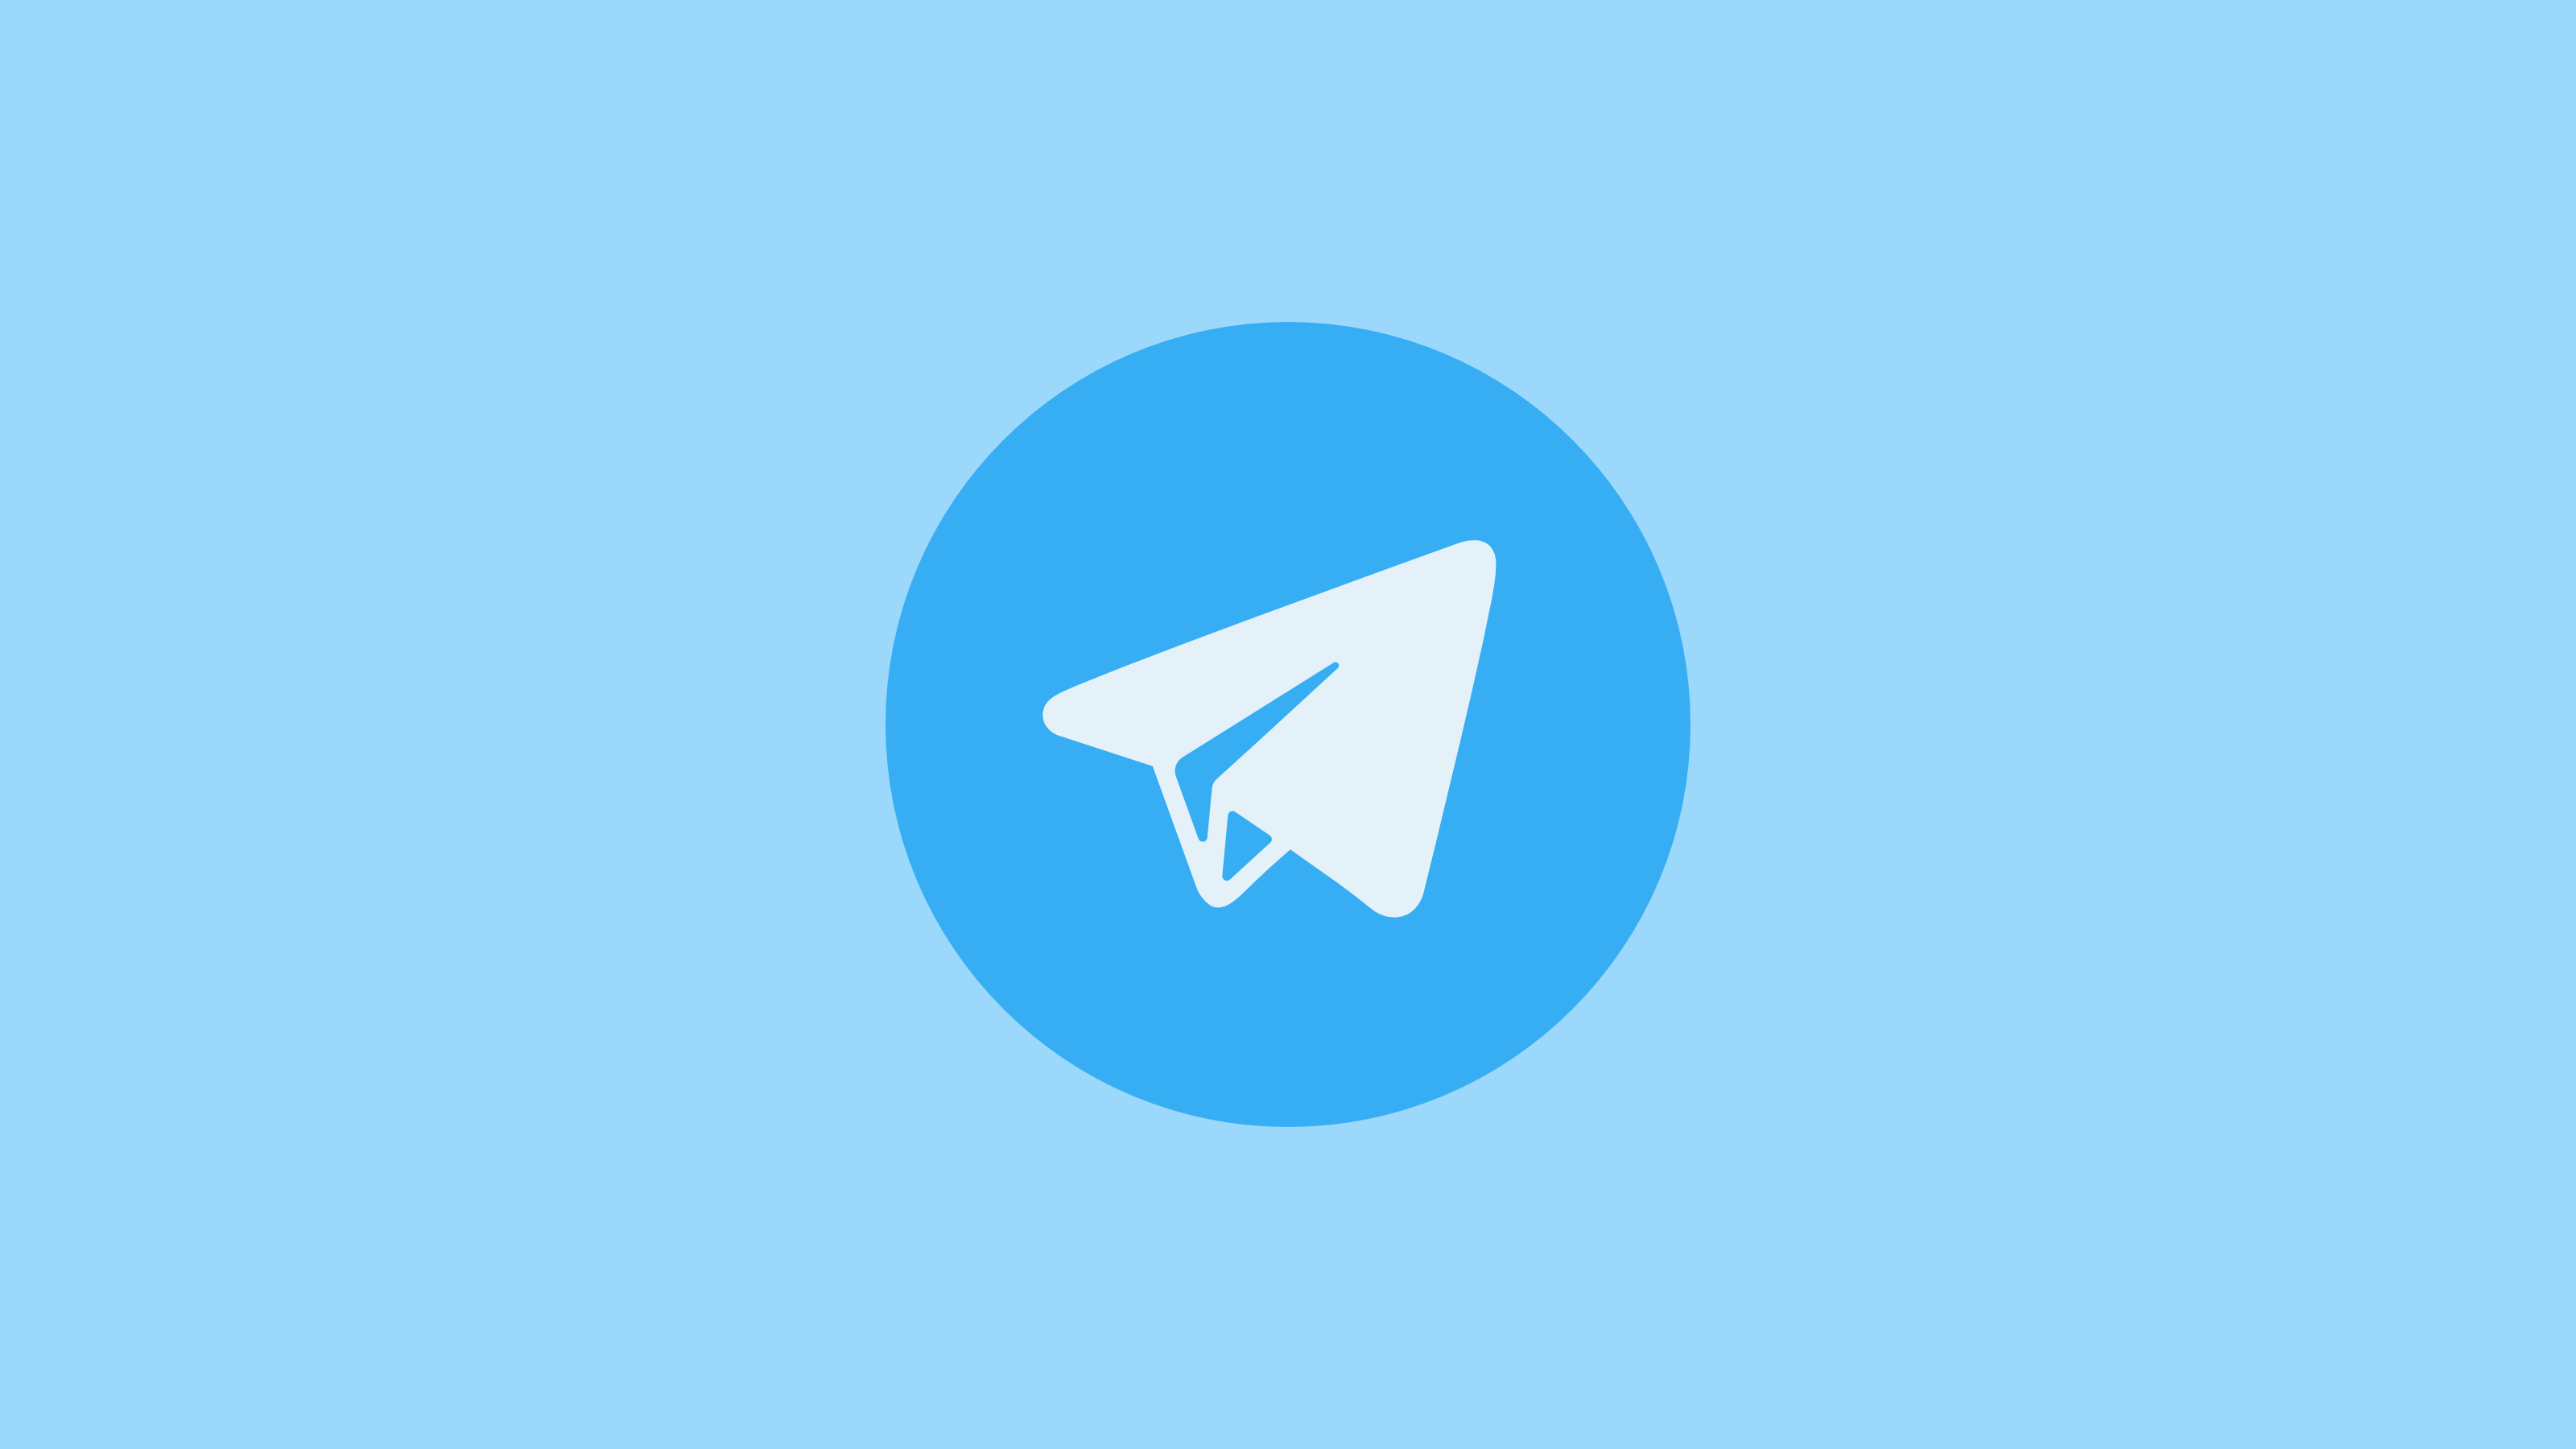 Telegram updates its group video call capacity up to 1,000 viewers